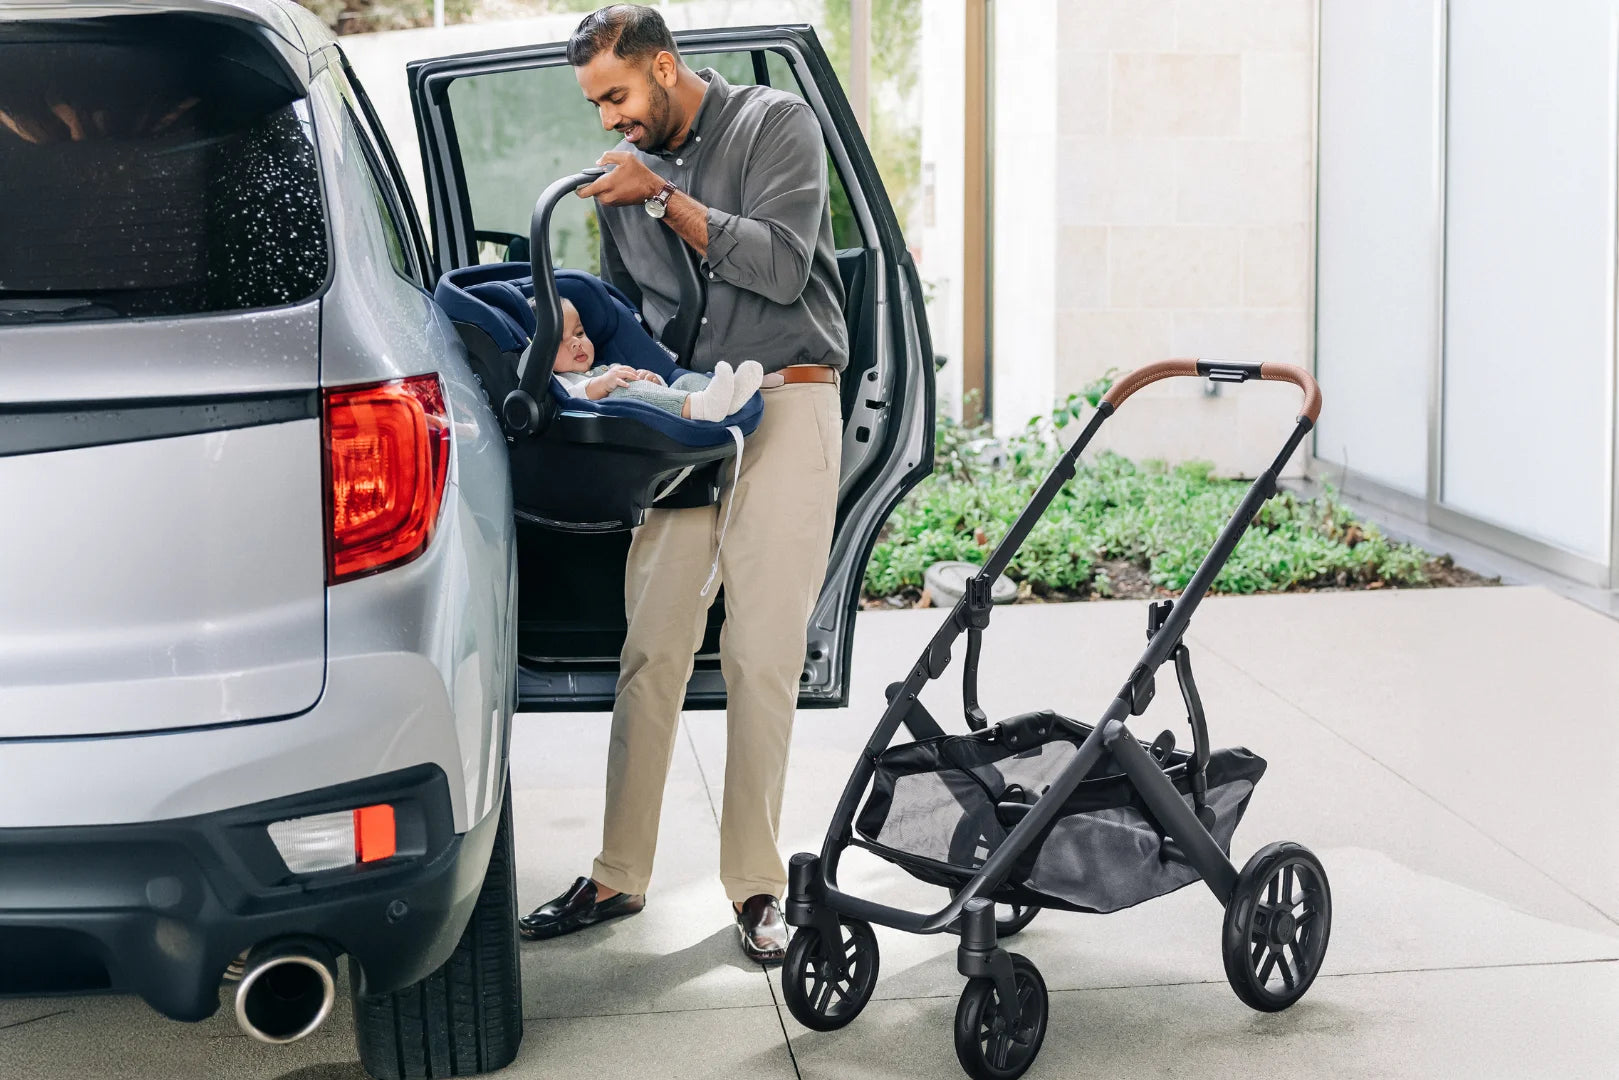 This image depicts a father taking the Mesa i-Size car seat off of the Vista chassis and placing it in the back seat of their car.